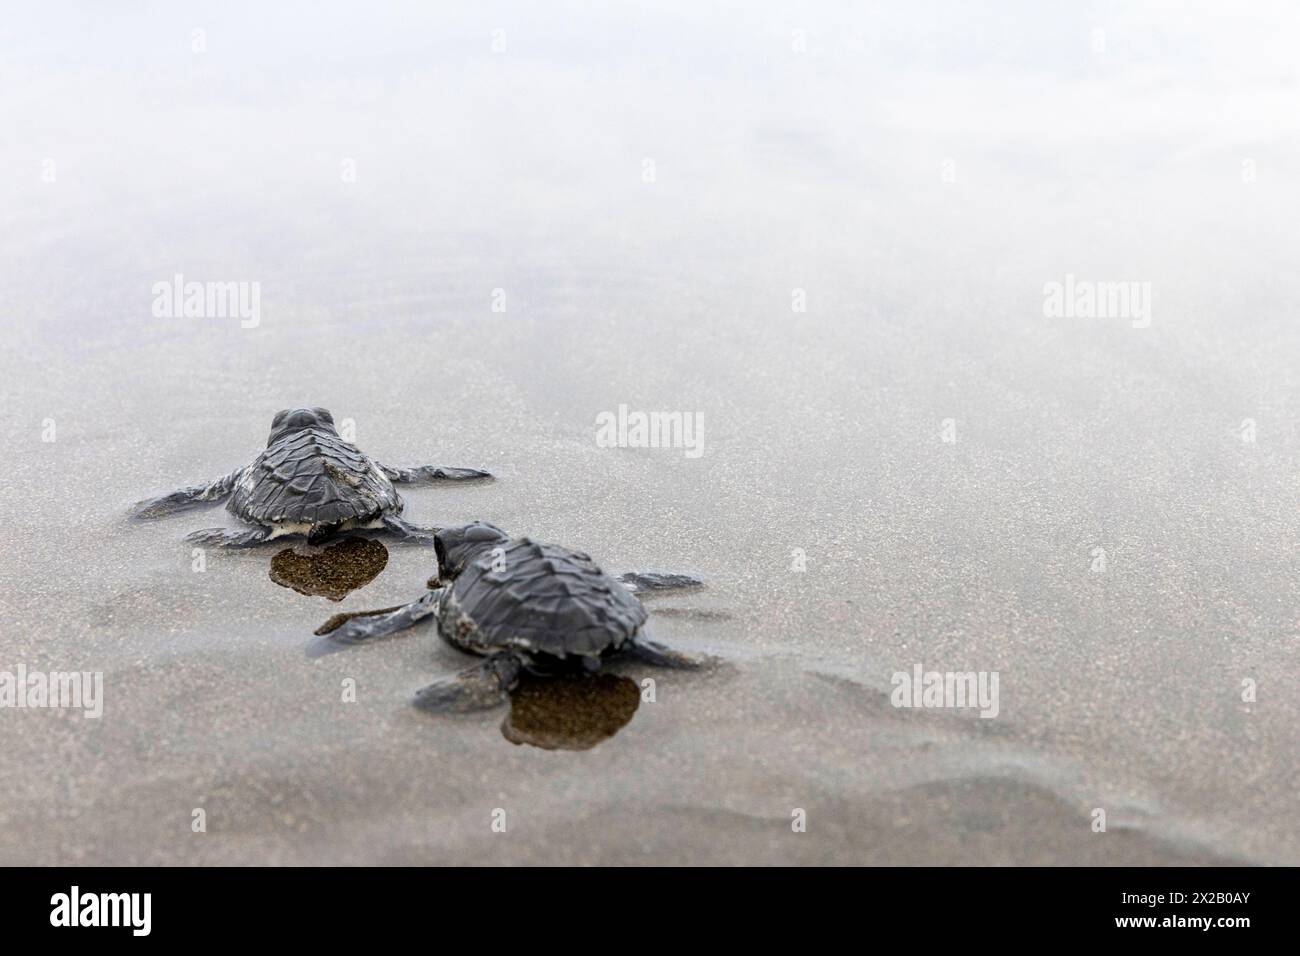 Beautiful baby Olive ridley turtles (Lepidochelys olivacea) or Laura turtles leaving the beach where they hatch on Isla damas island in Costa rica Stock Photo